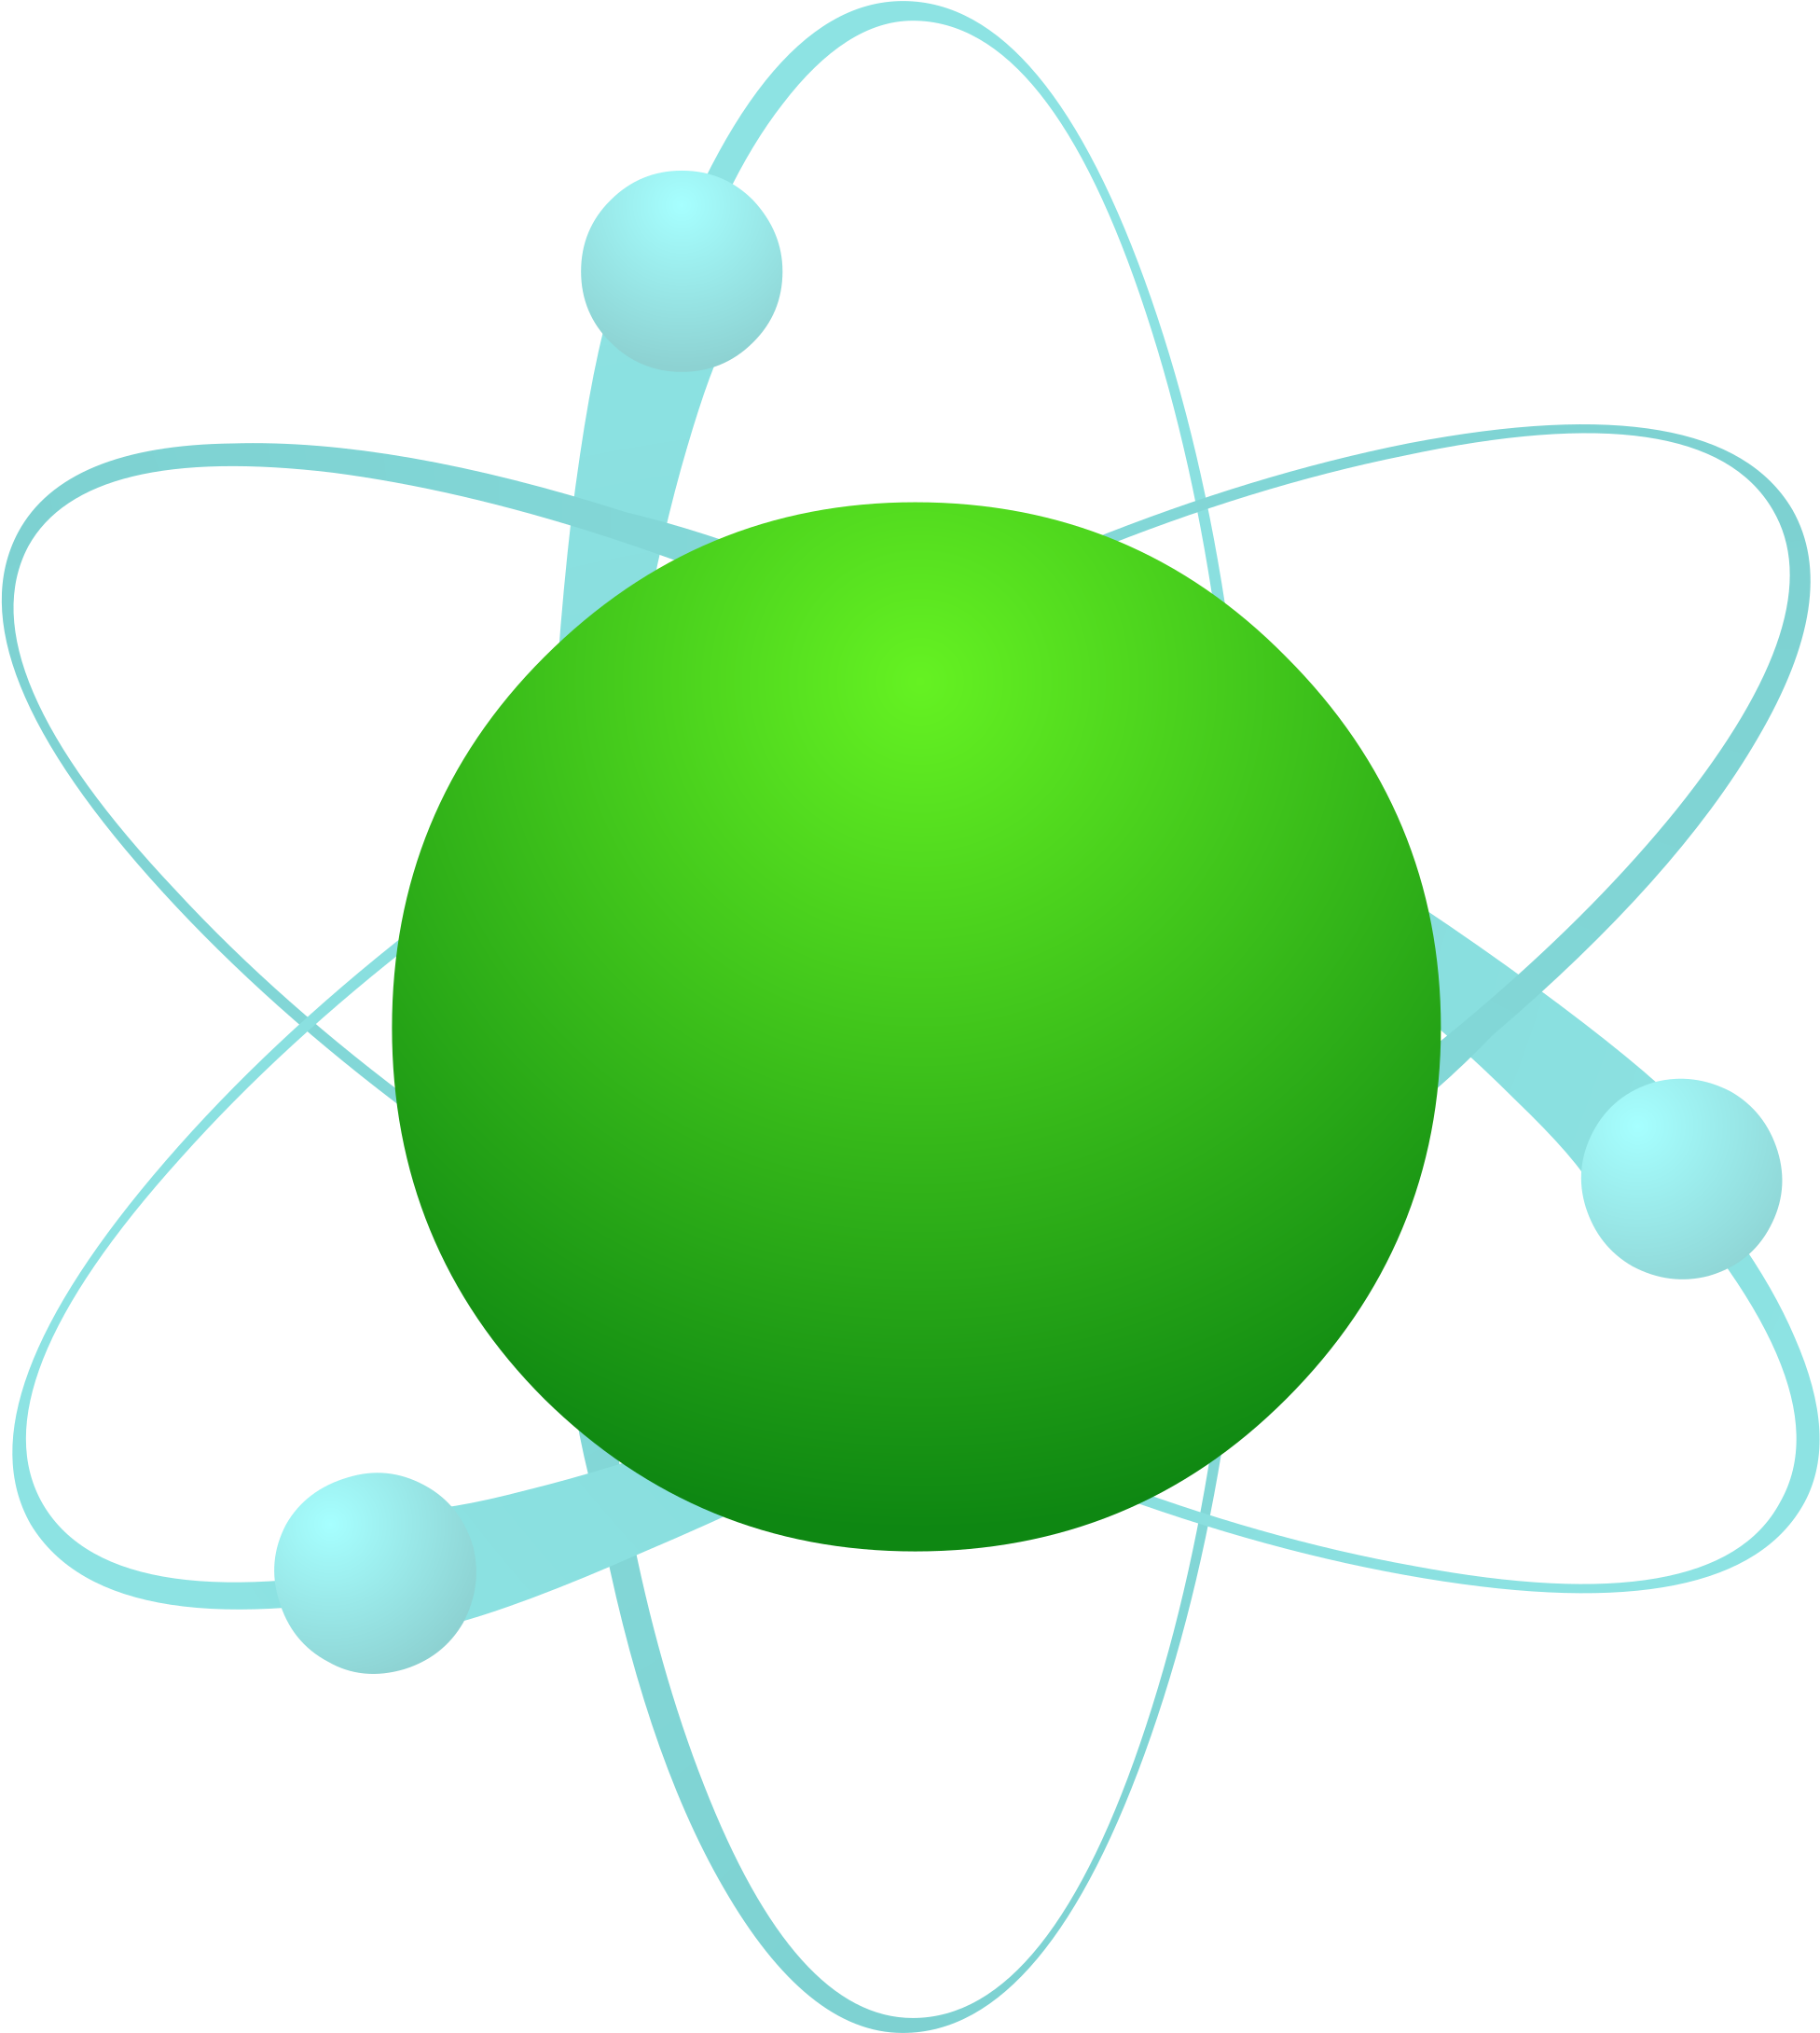 Atoms And Electrons Chemistry Clip Art - Atoms And Electrons Chemistry Clip Art (2158x2400)